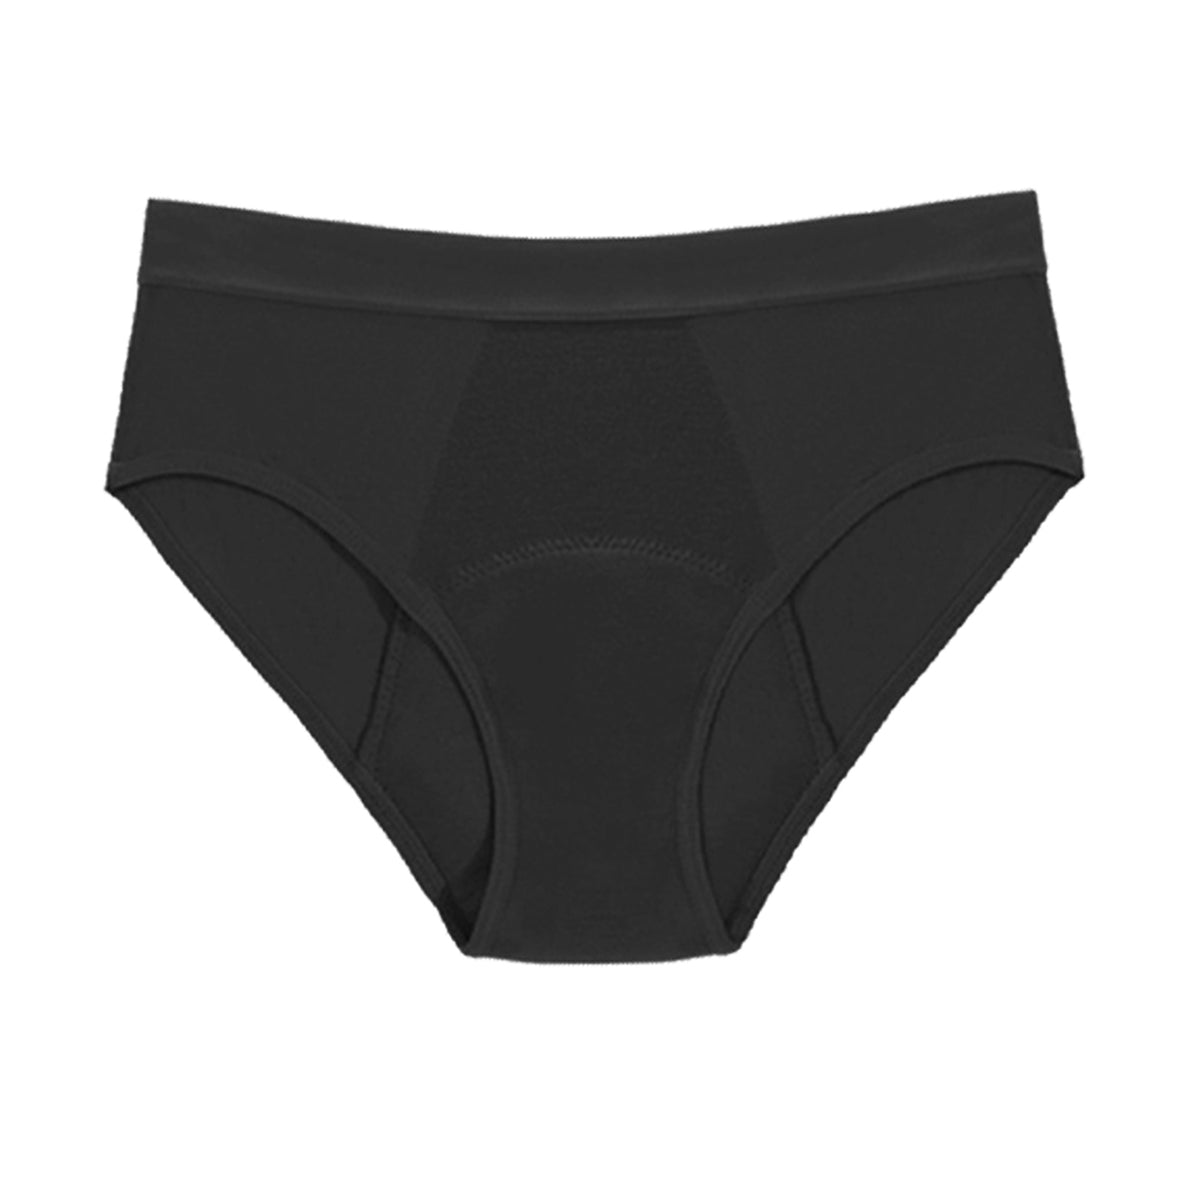 Period. by The Period Company. The Thong Period. in Sporty Stretch